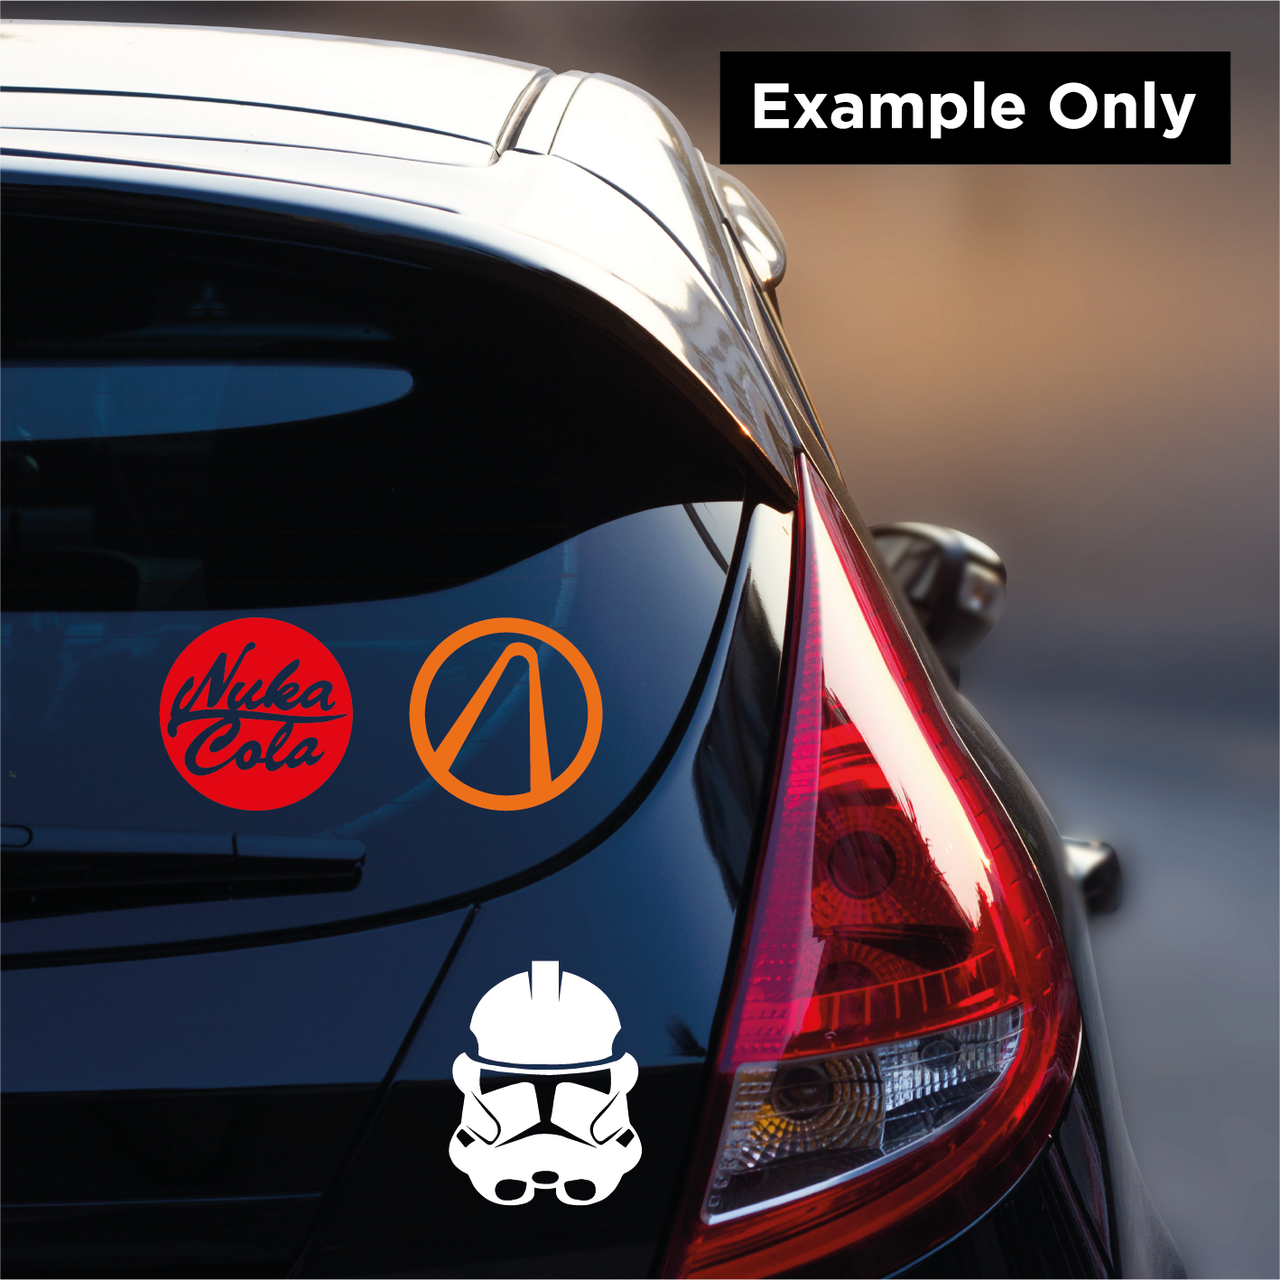 Star Wars Galactic Empire Decal